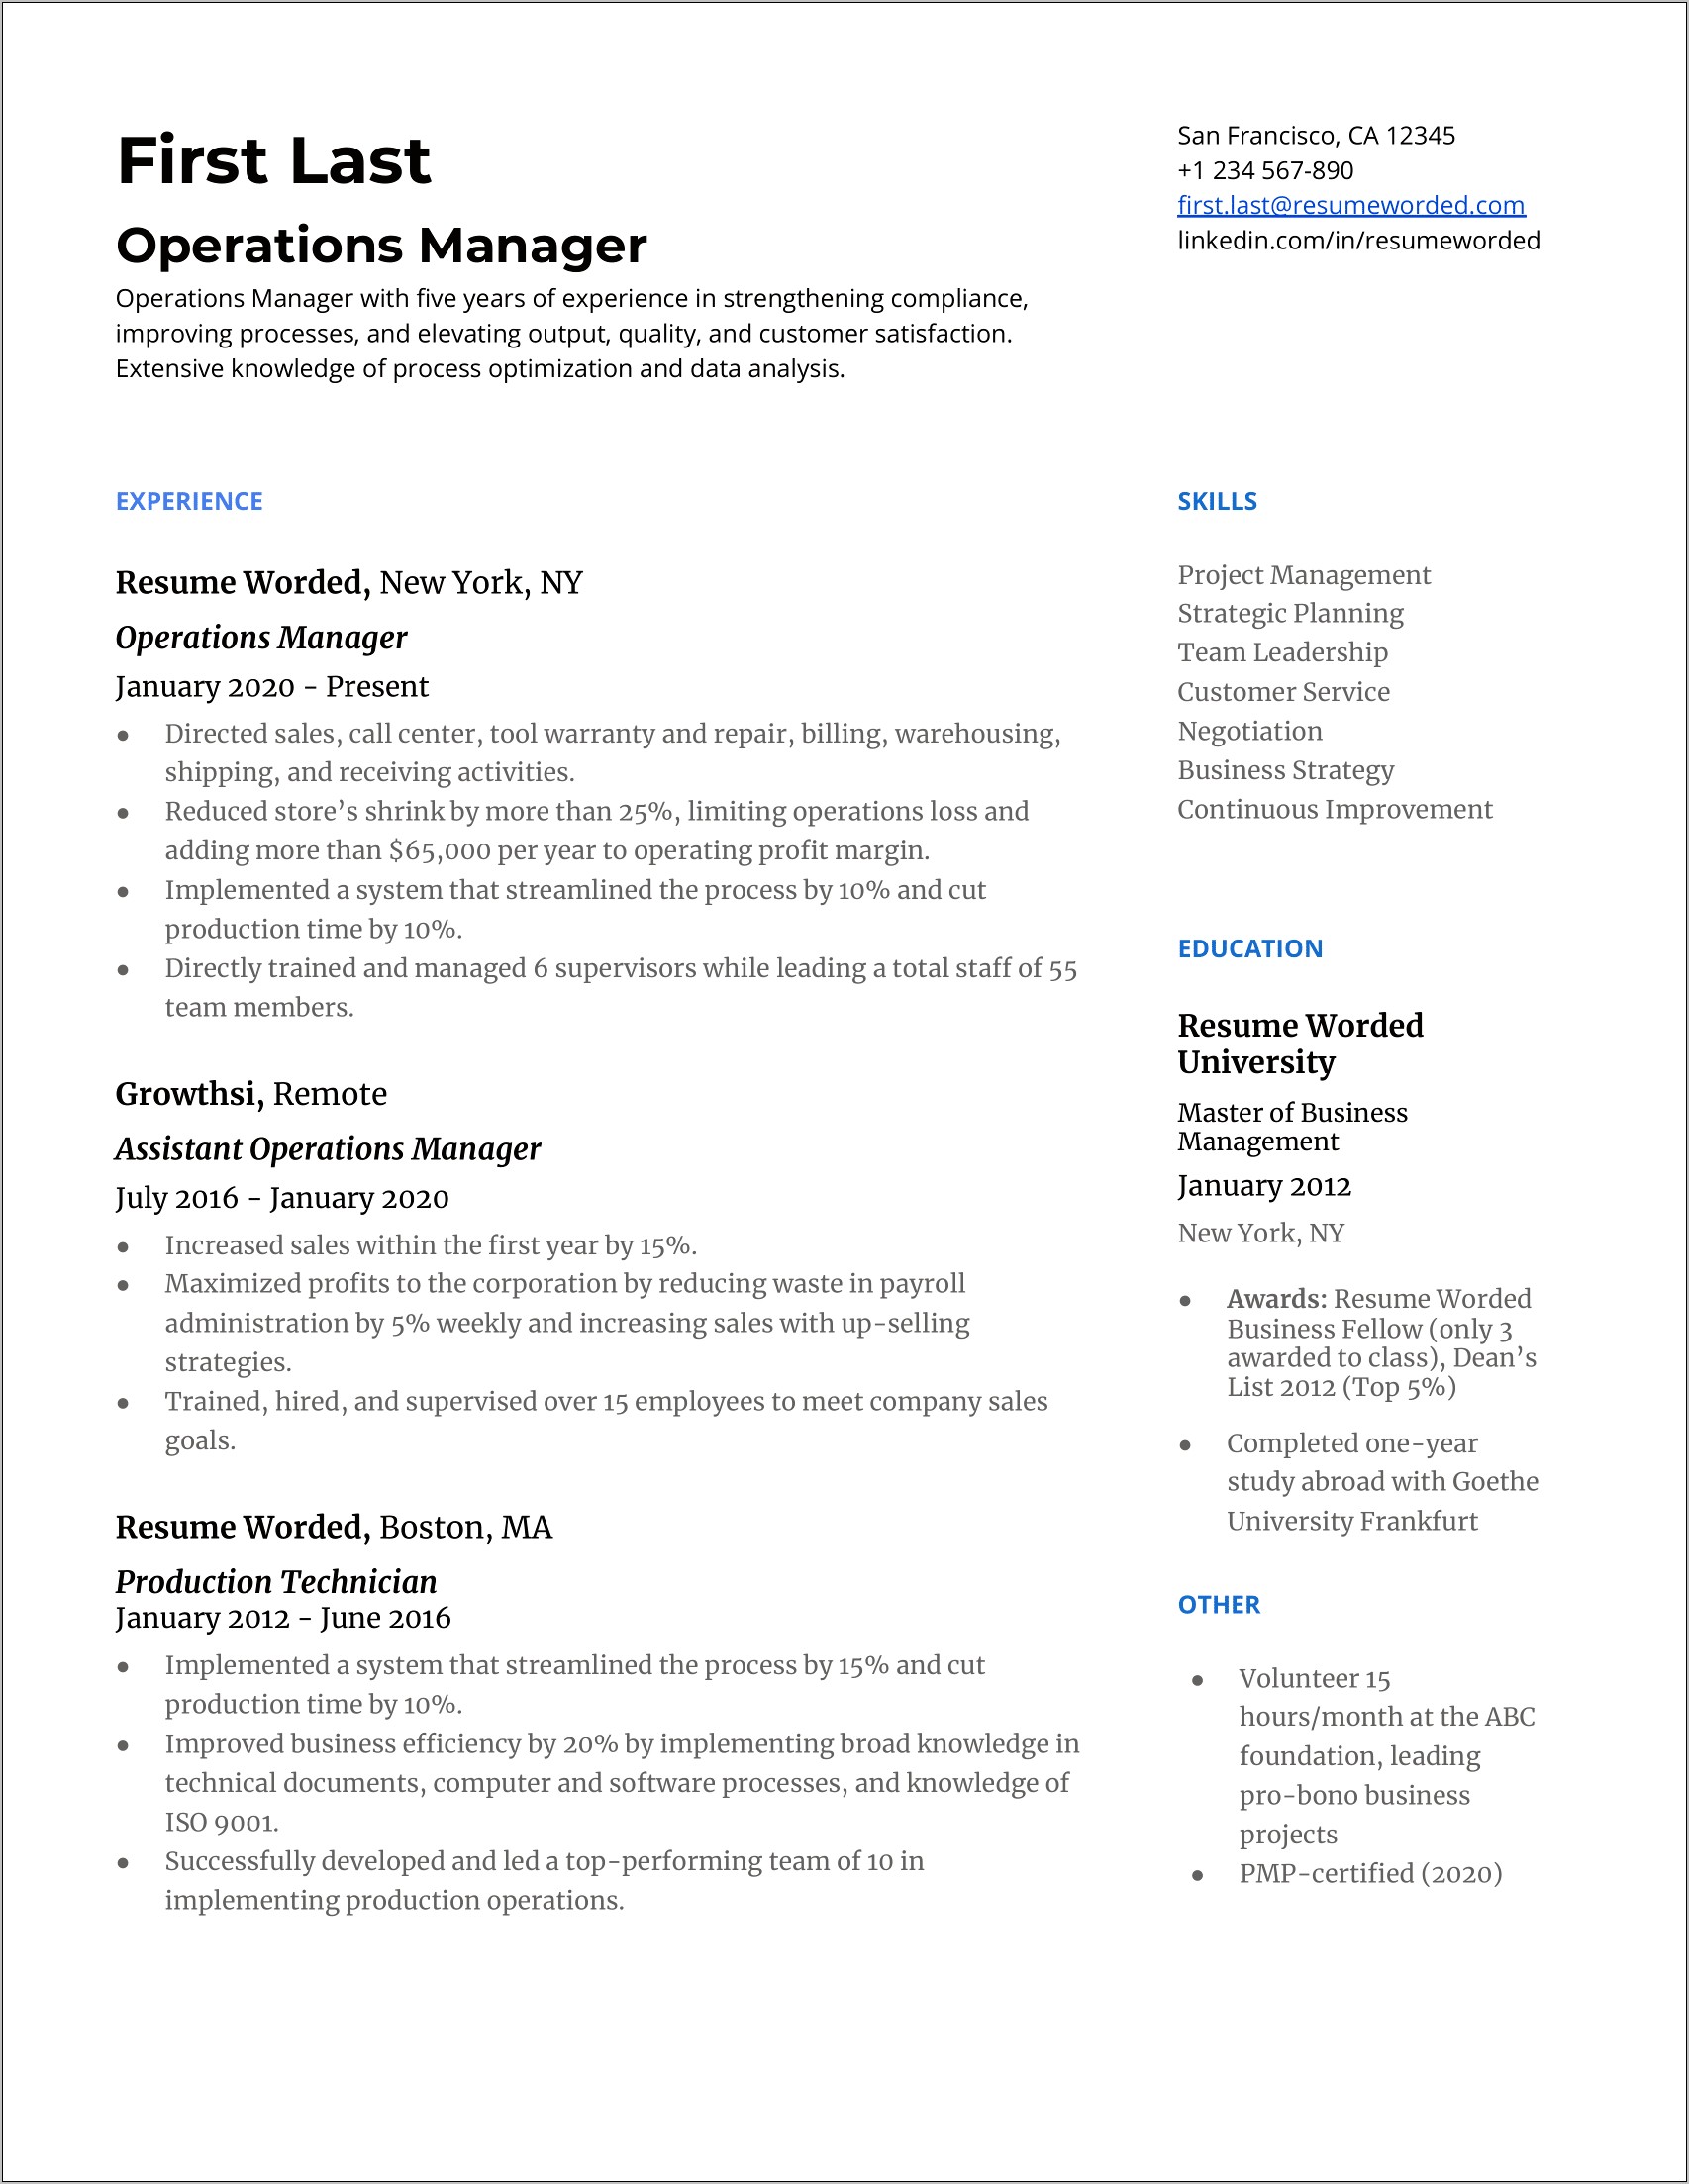 Qualitive Points For Stocking Jobs On Resume